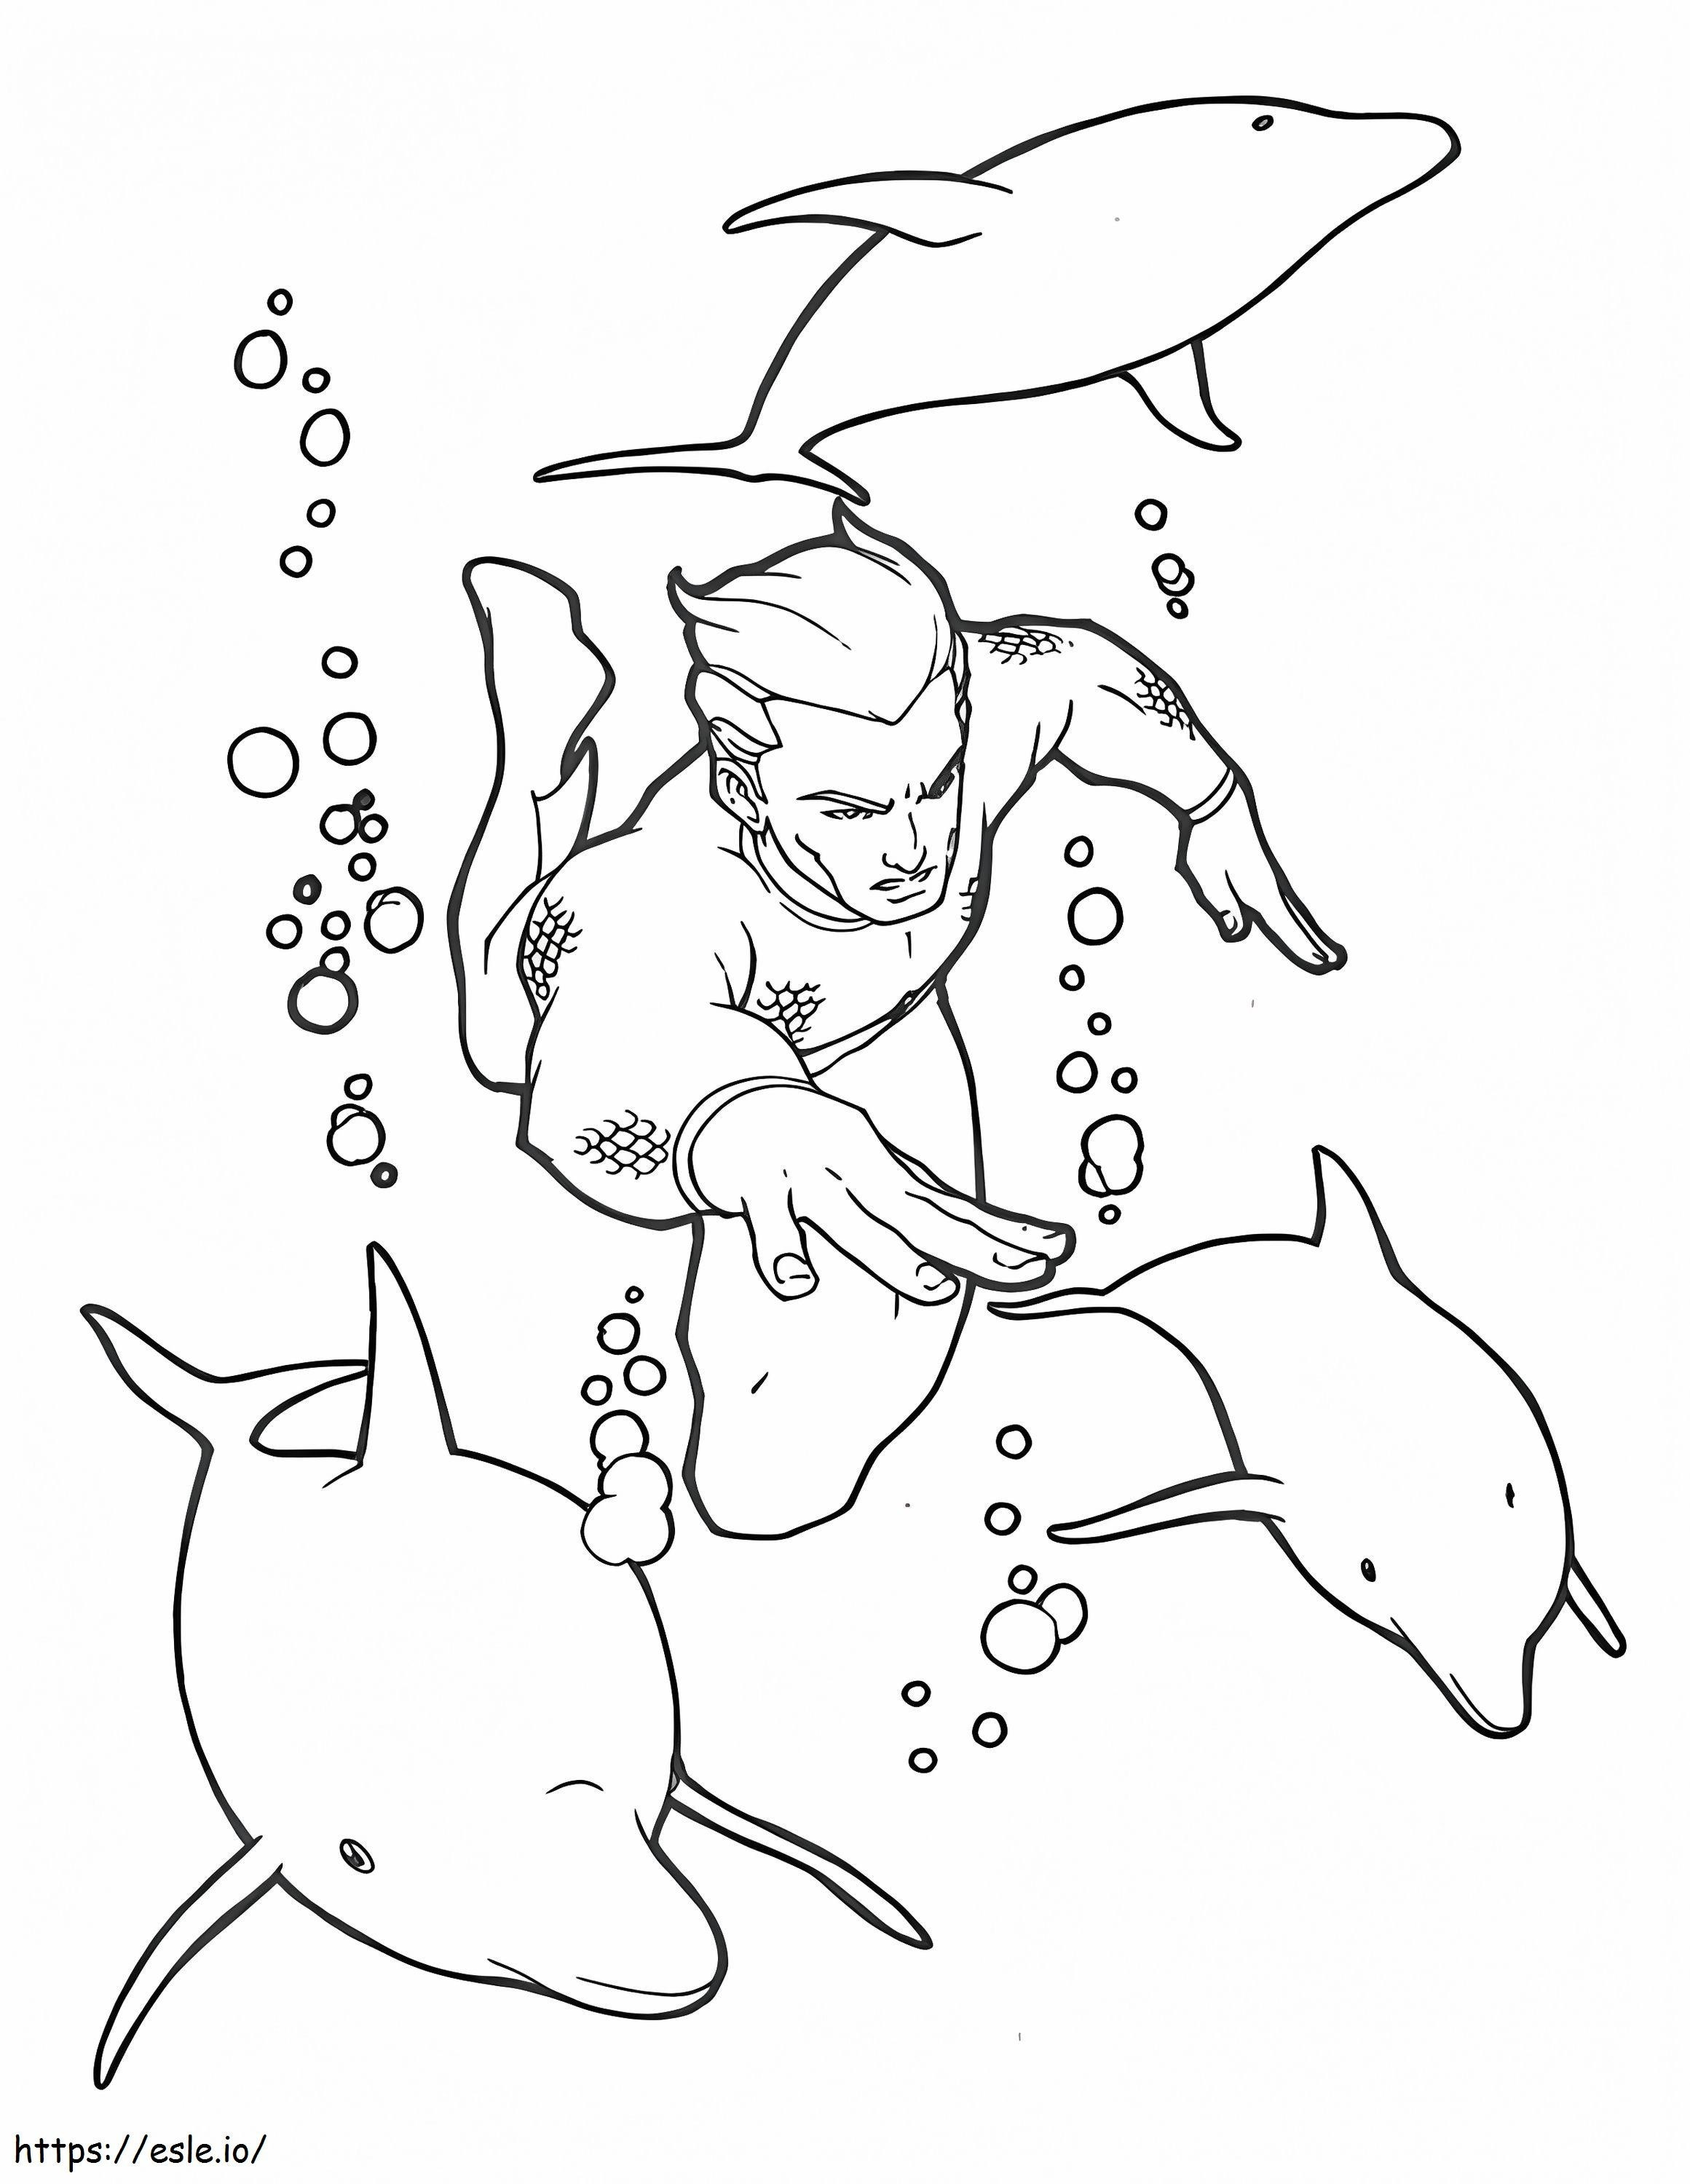 Aquaman And Dolphins coloring page